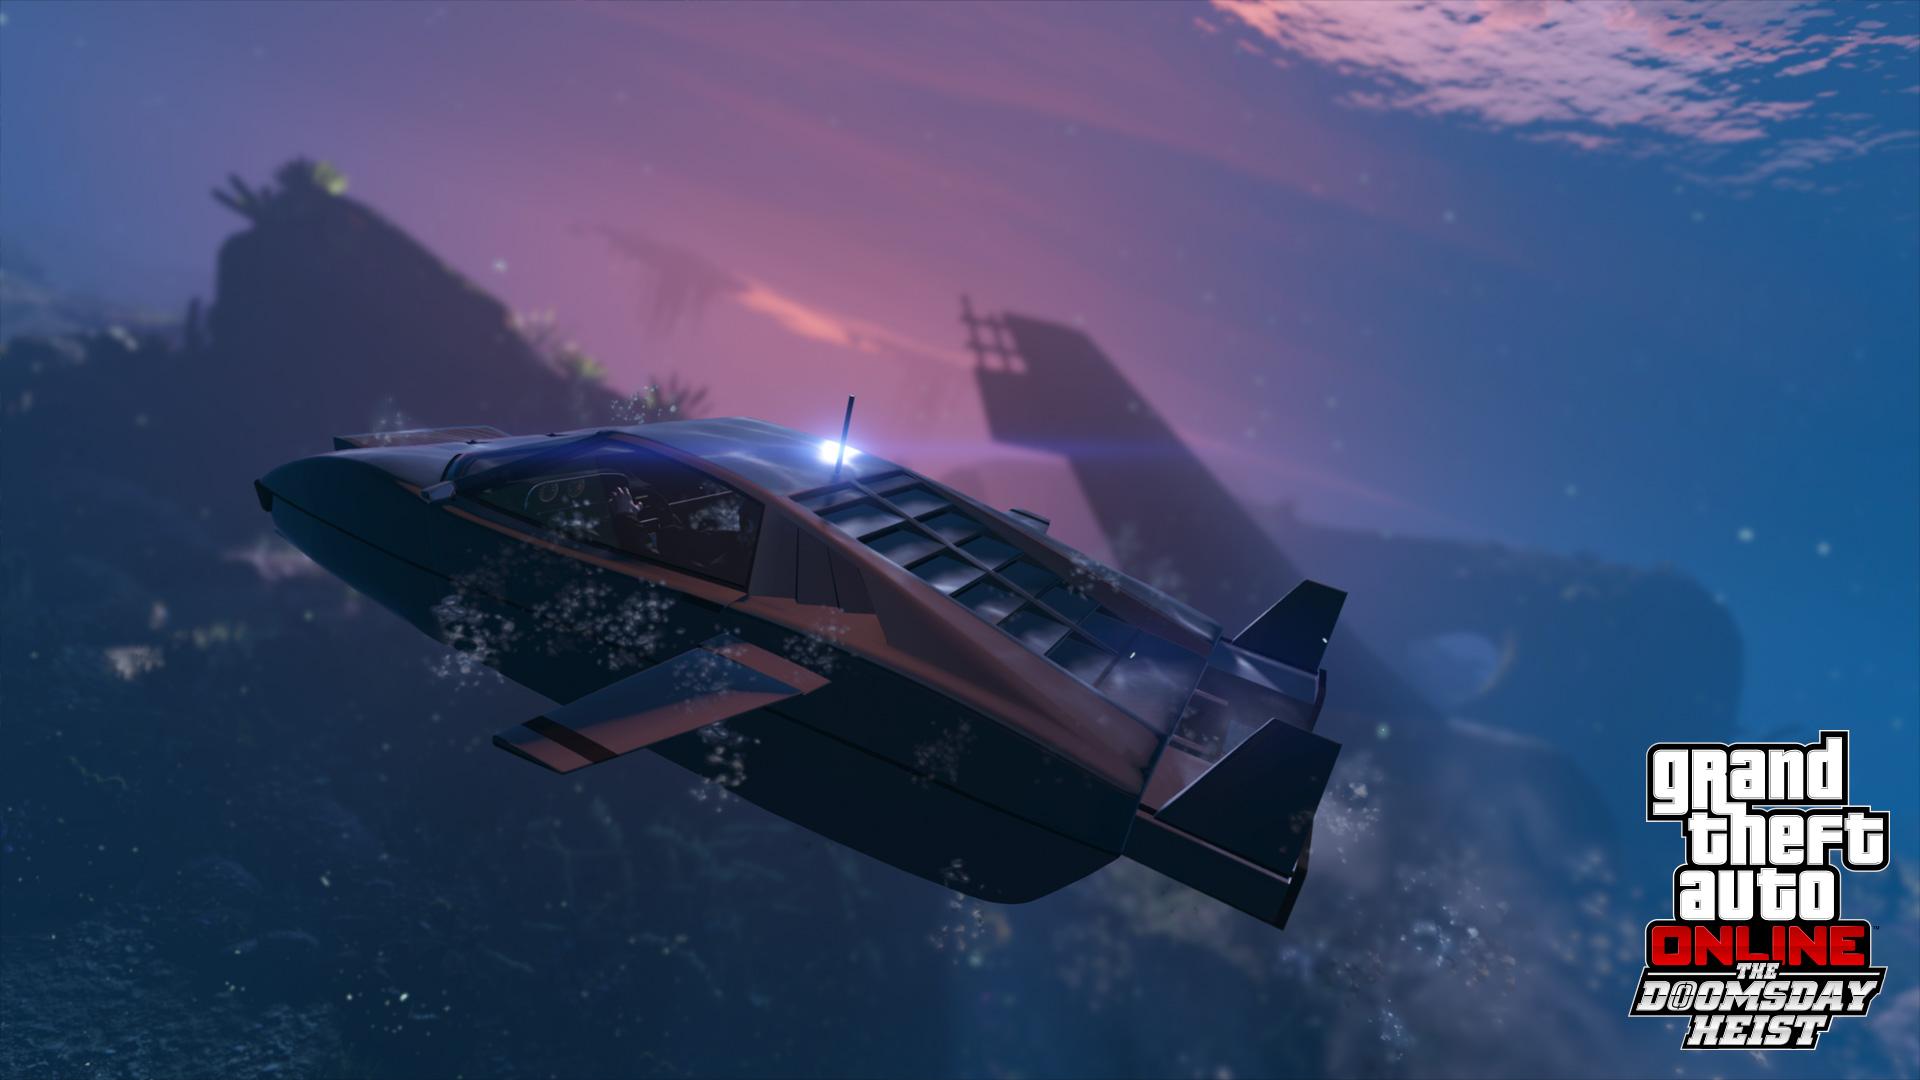 Screenshot №9 from game Grand Theft Auto V